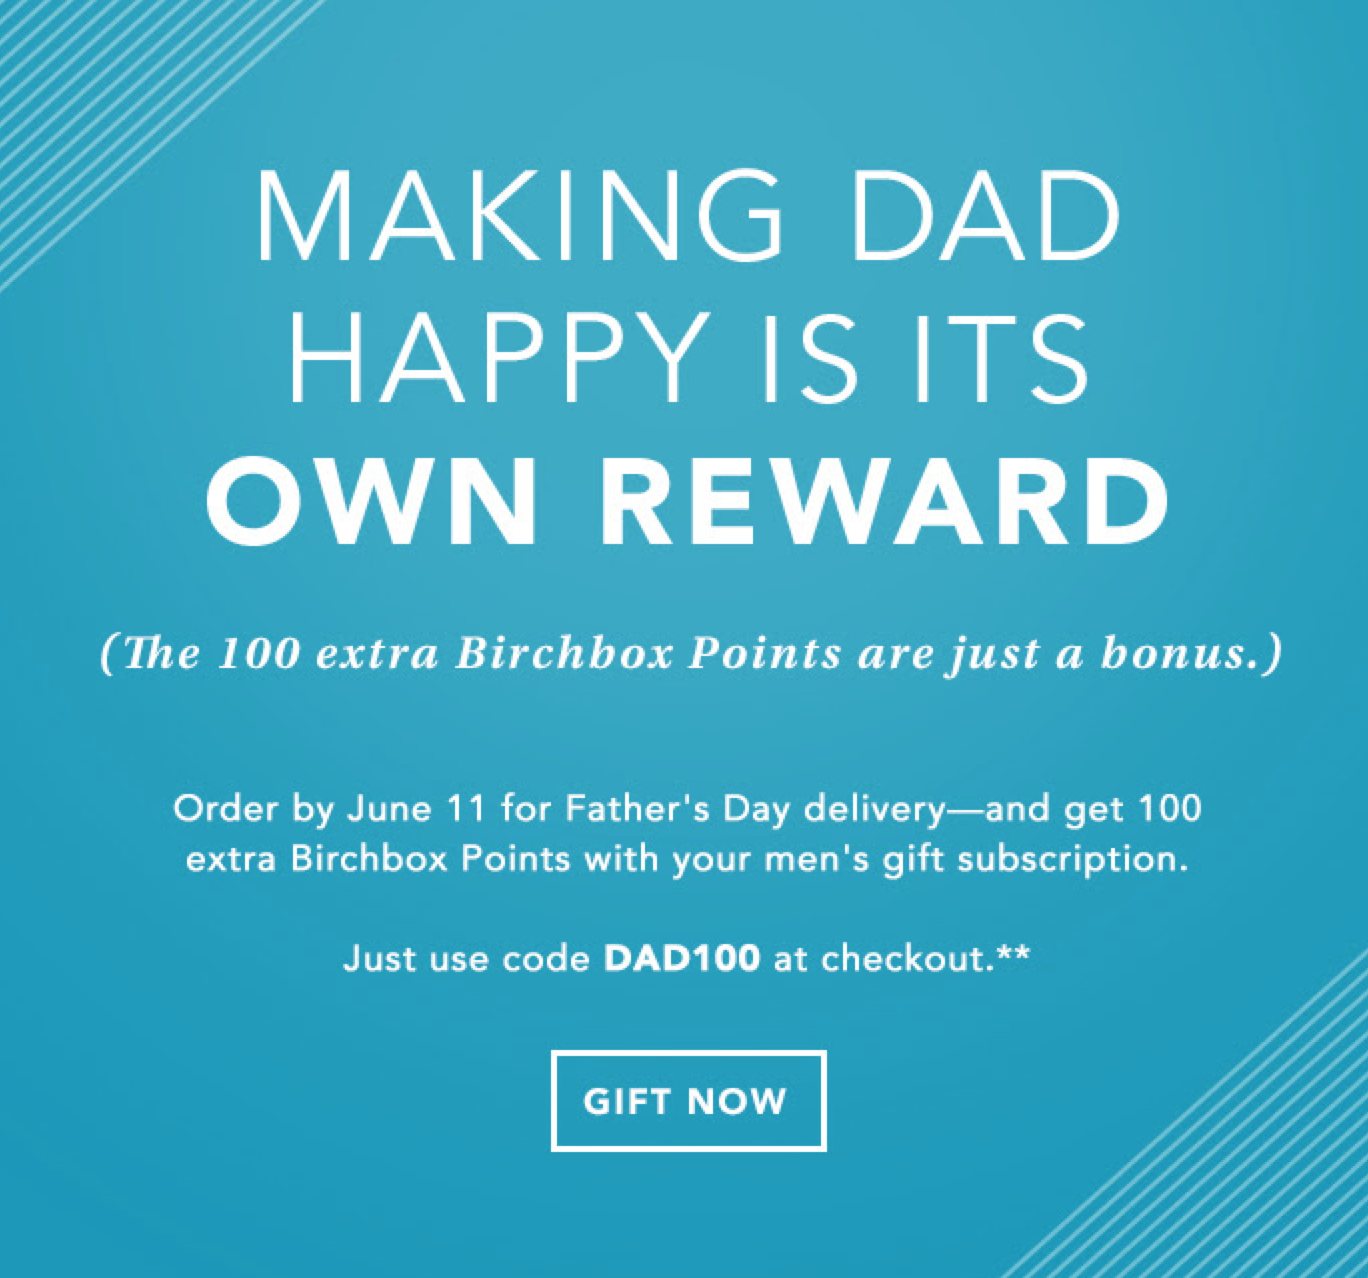 Birchbox Coupon - Extra 100 Points with a Men's Gift Subscription!